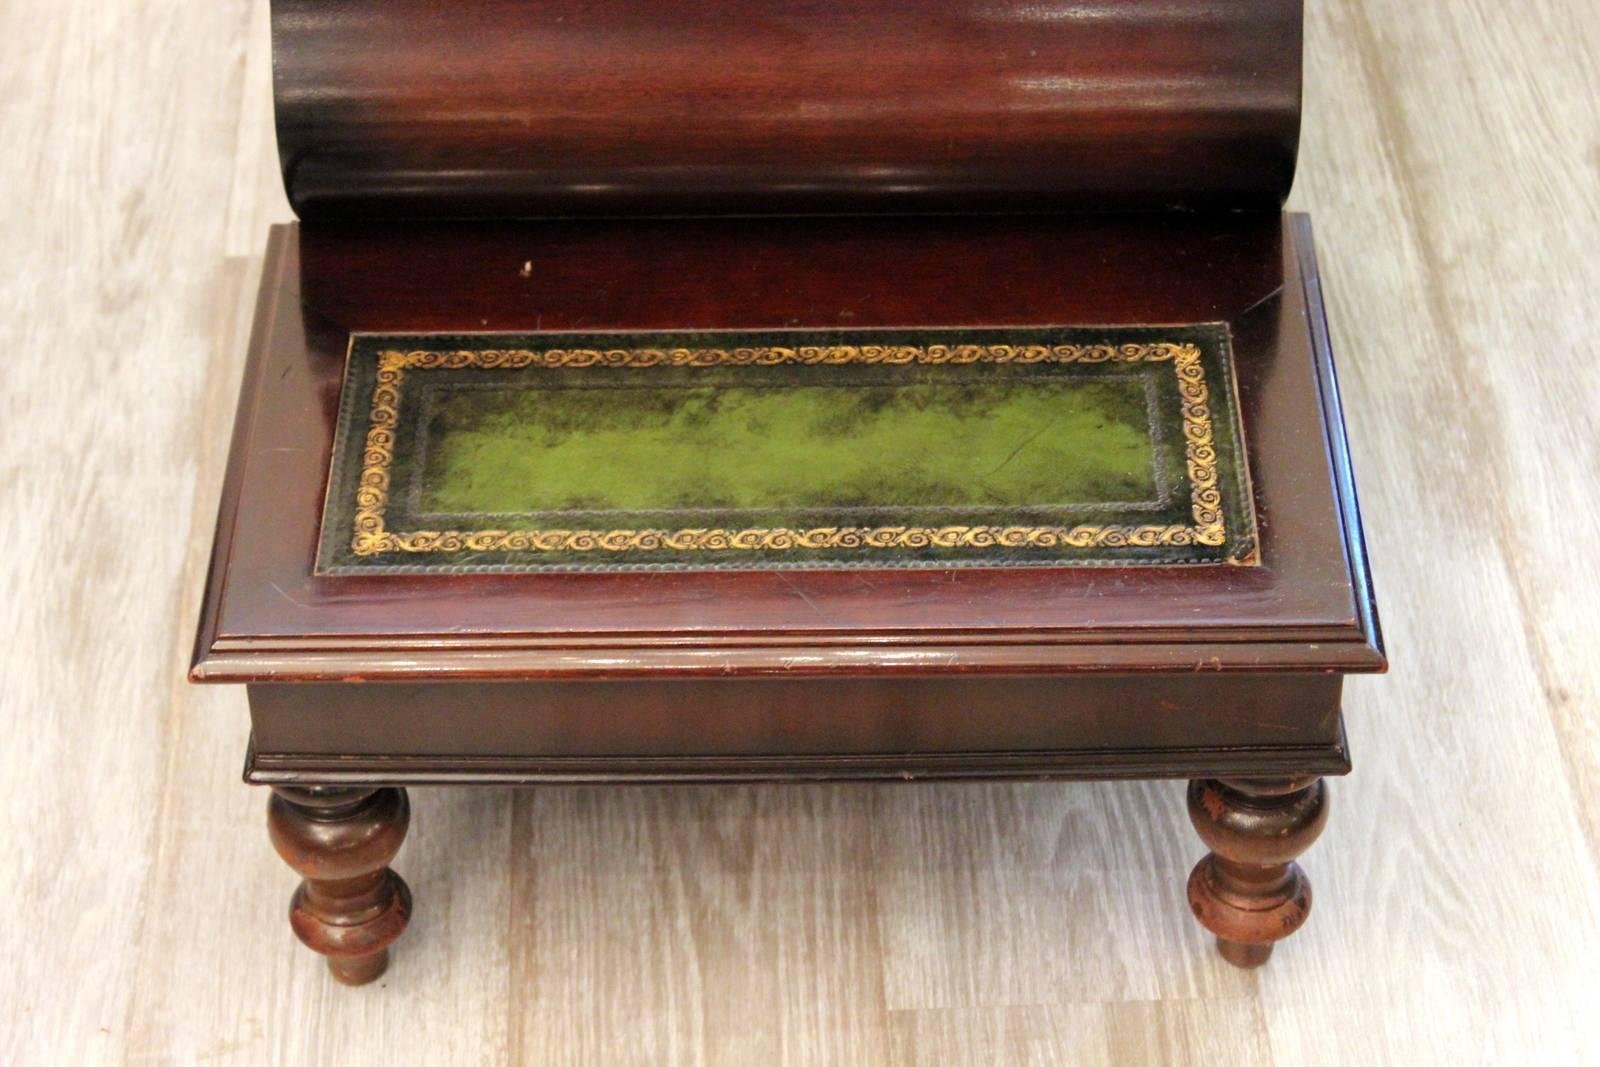 A set of mahogany and leather library steps can also be used as an end table
In William IV style
The leather appointed steps reveal one storage compartment
Each side has cast brass lion motif handles.